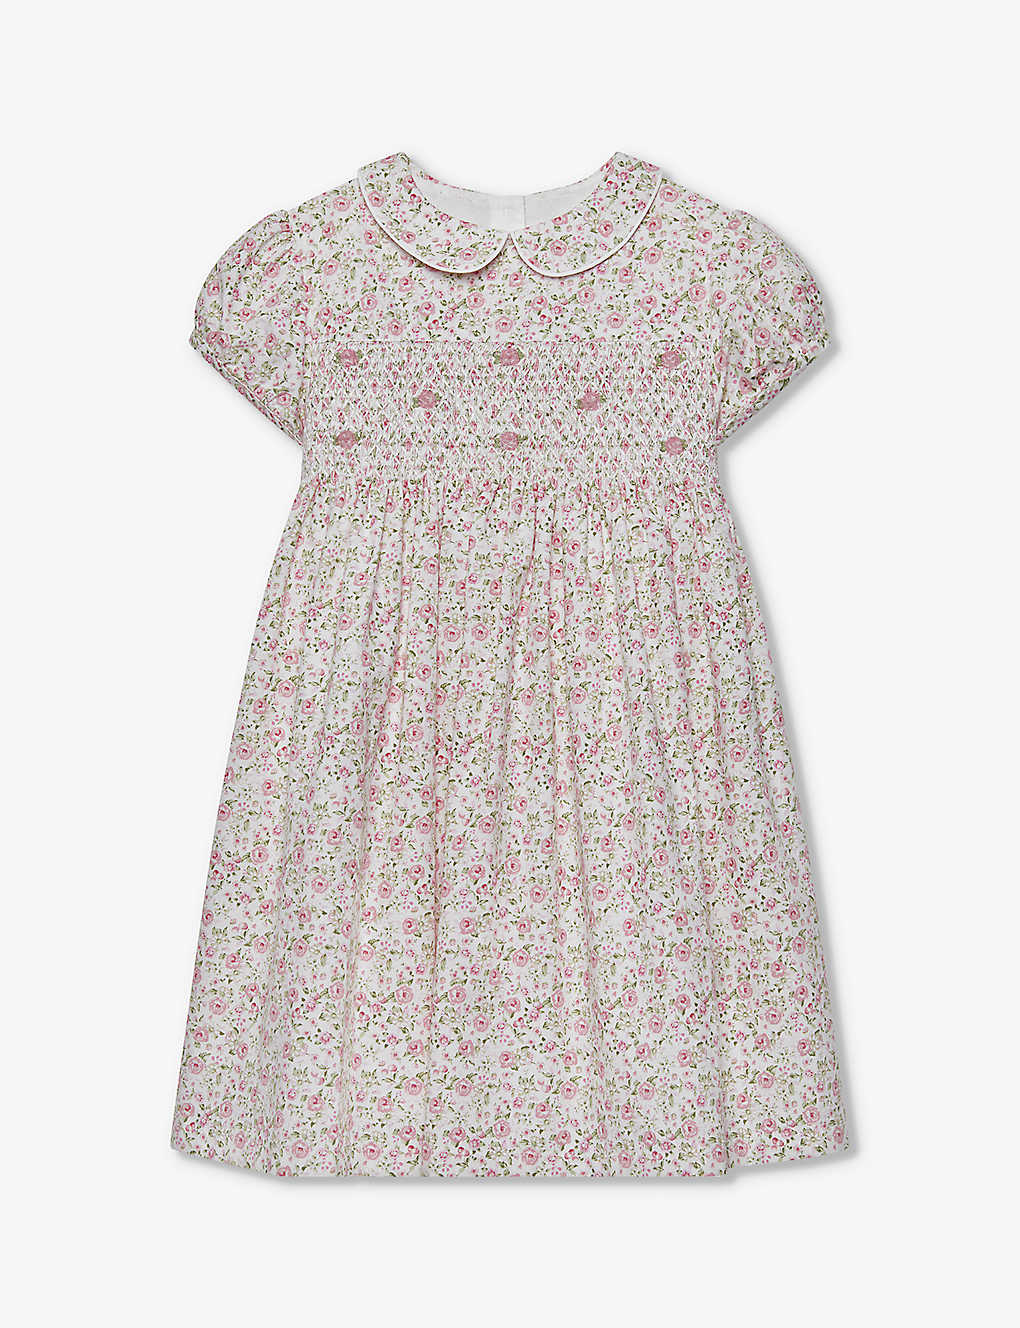 Trotters Babies'  Pink Rose Catherine Rose Floral-print Cotton Dress 2-11 Years